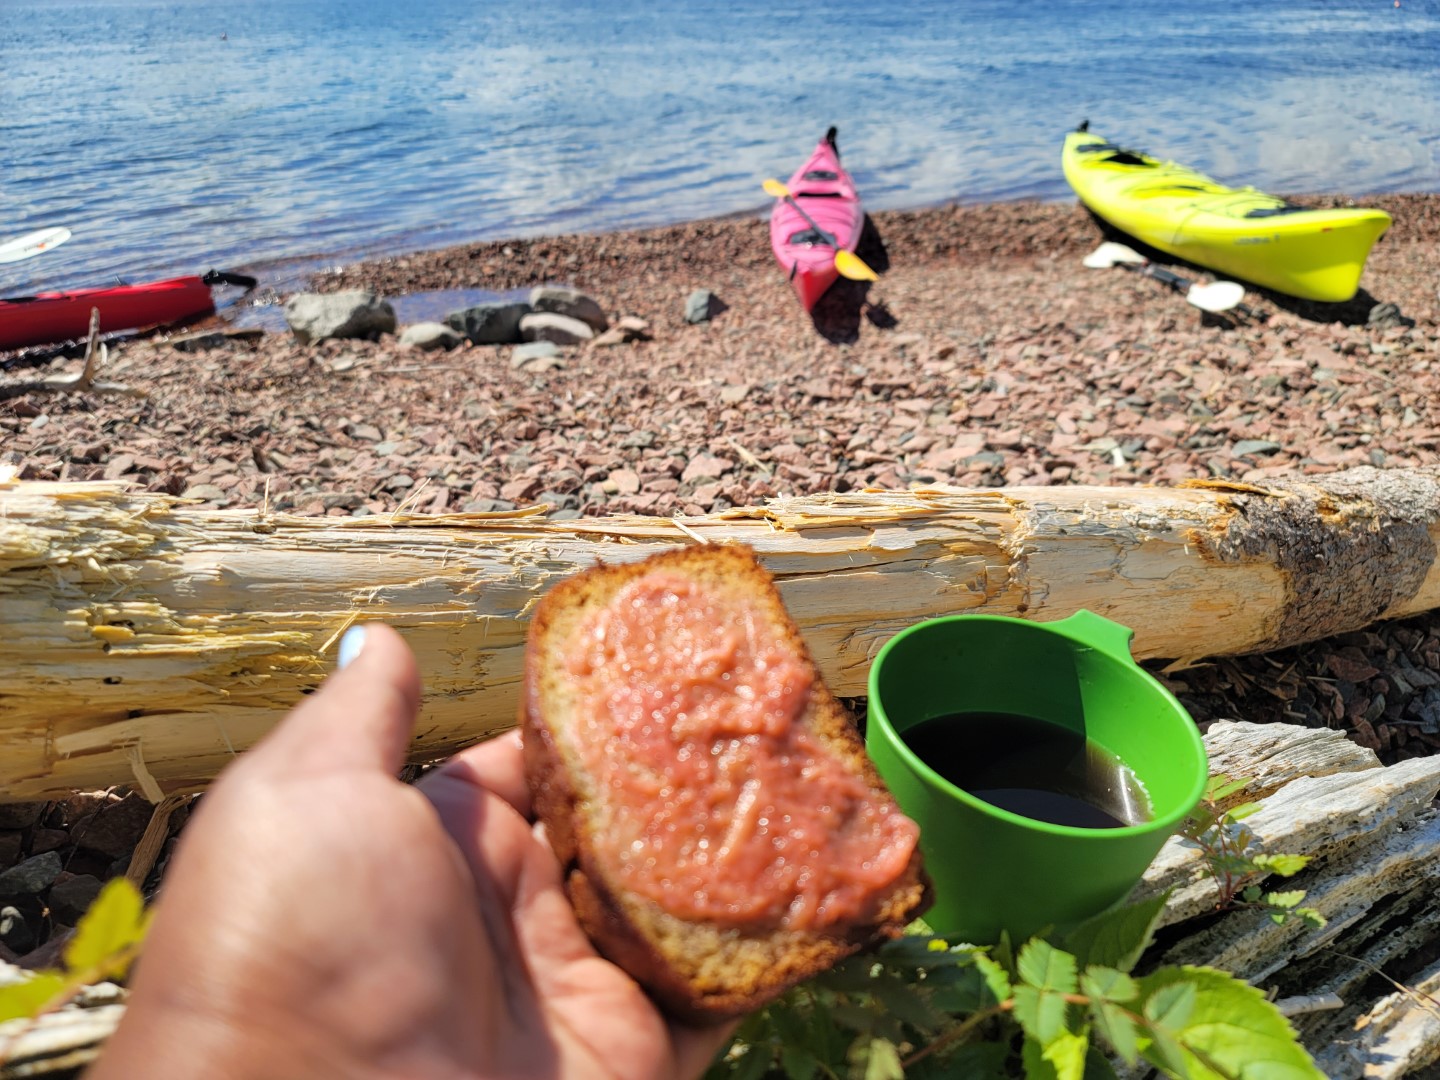 bread and jam at beach with kayaks